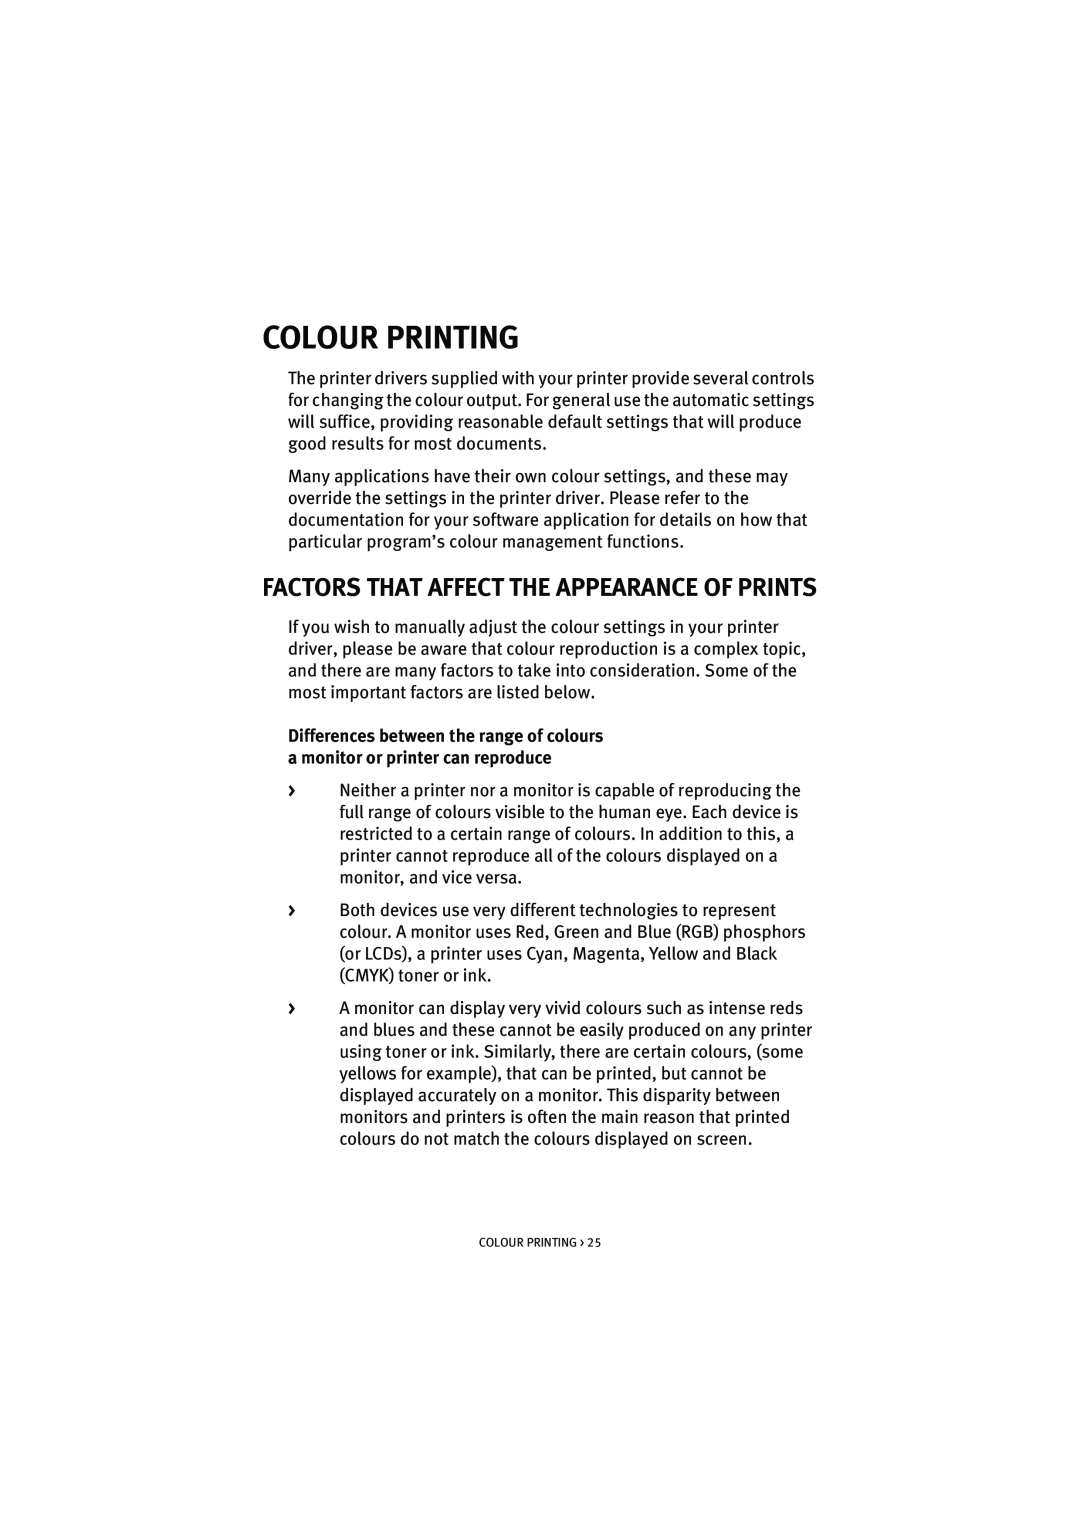 Oki 5200n manual Colour Printing, Factors That Affect The Appearance Of Prints 